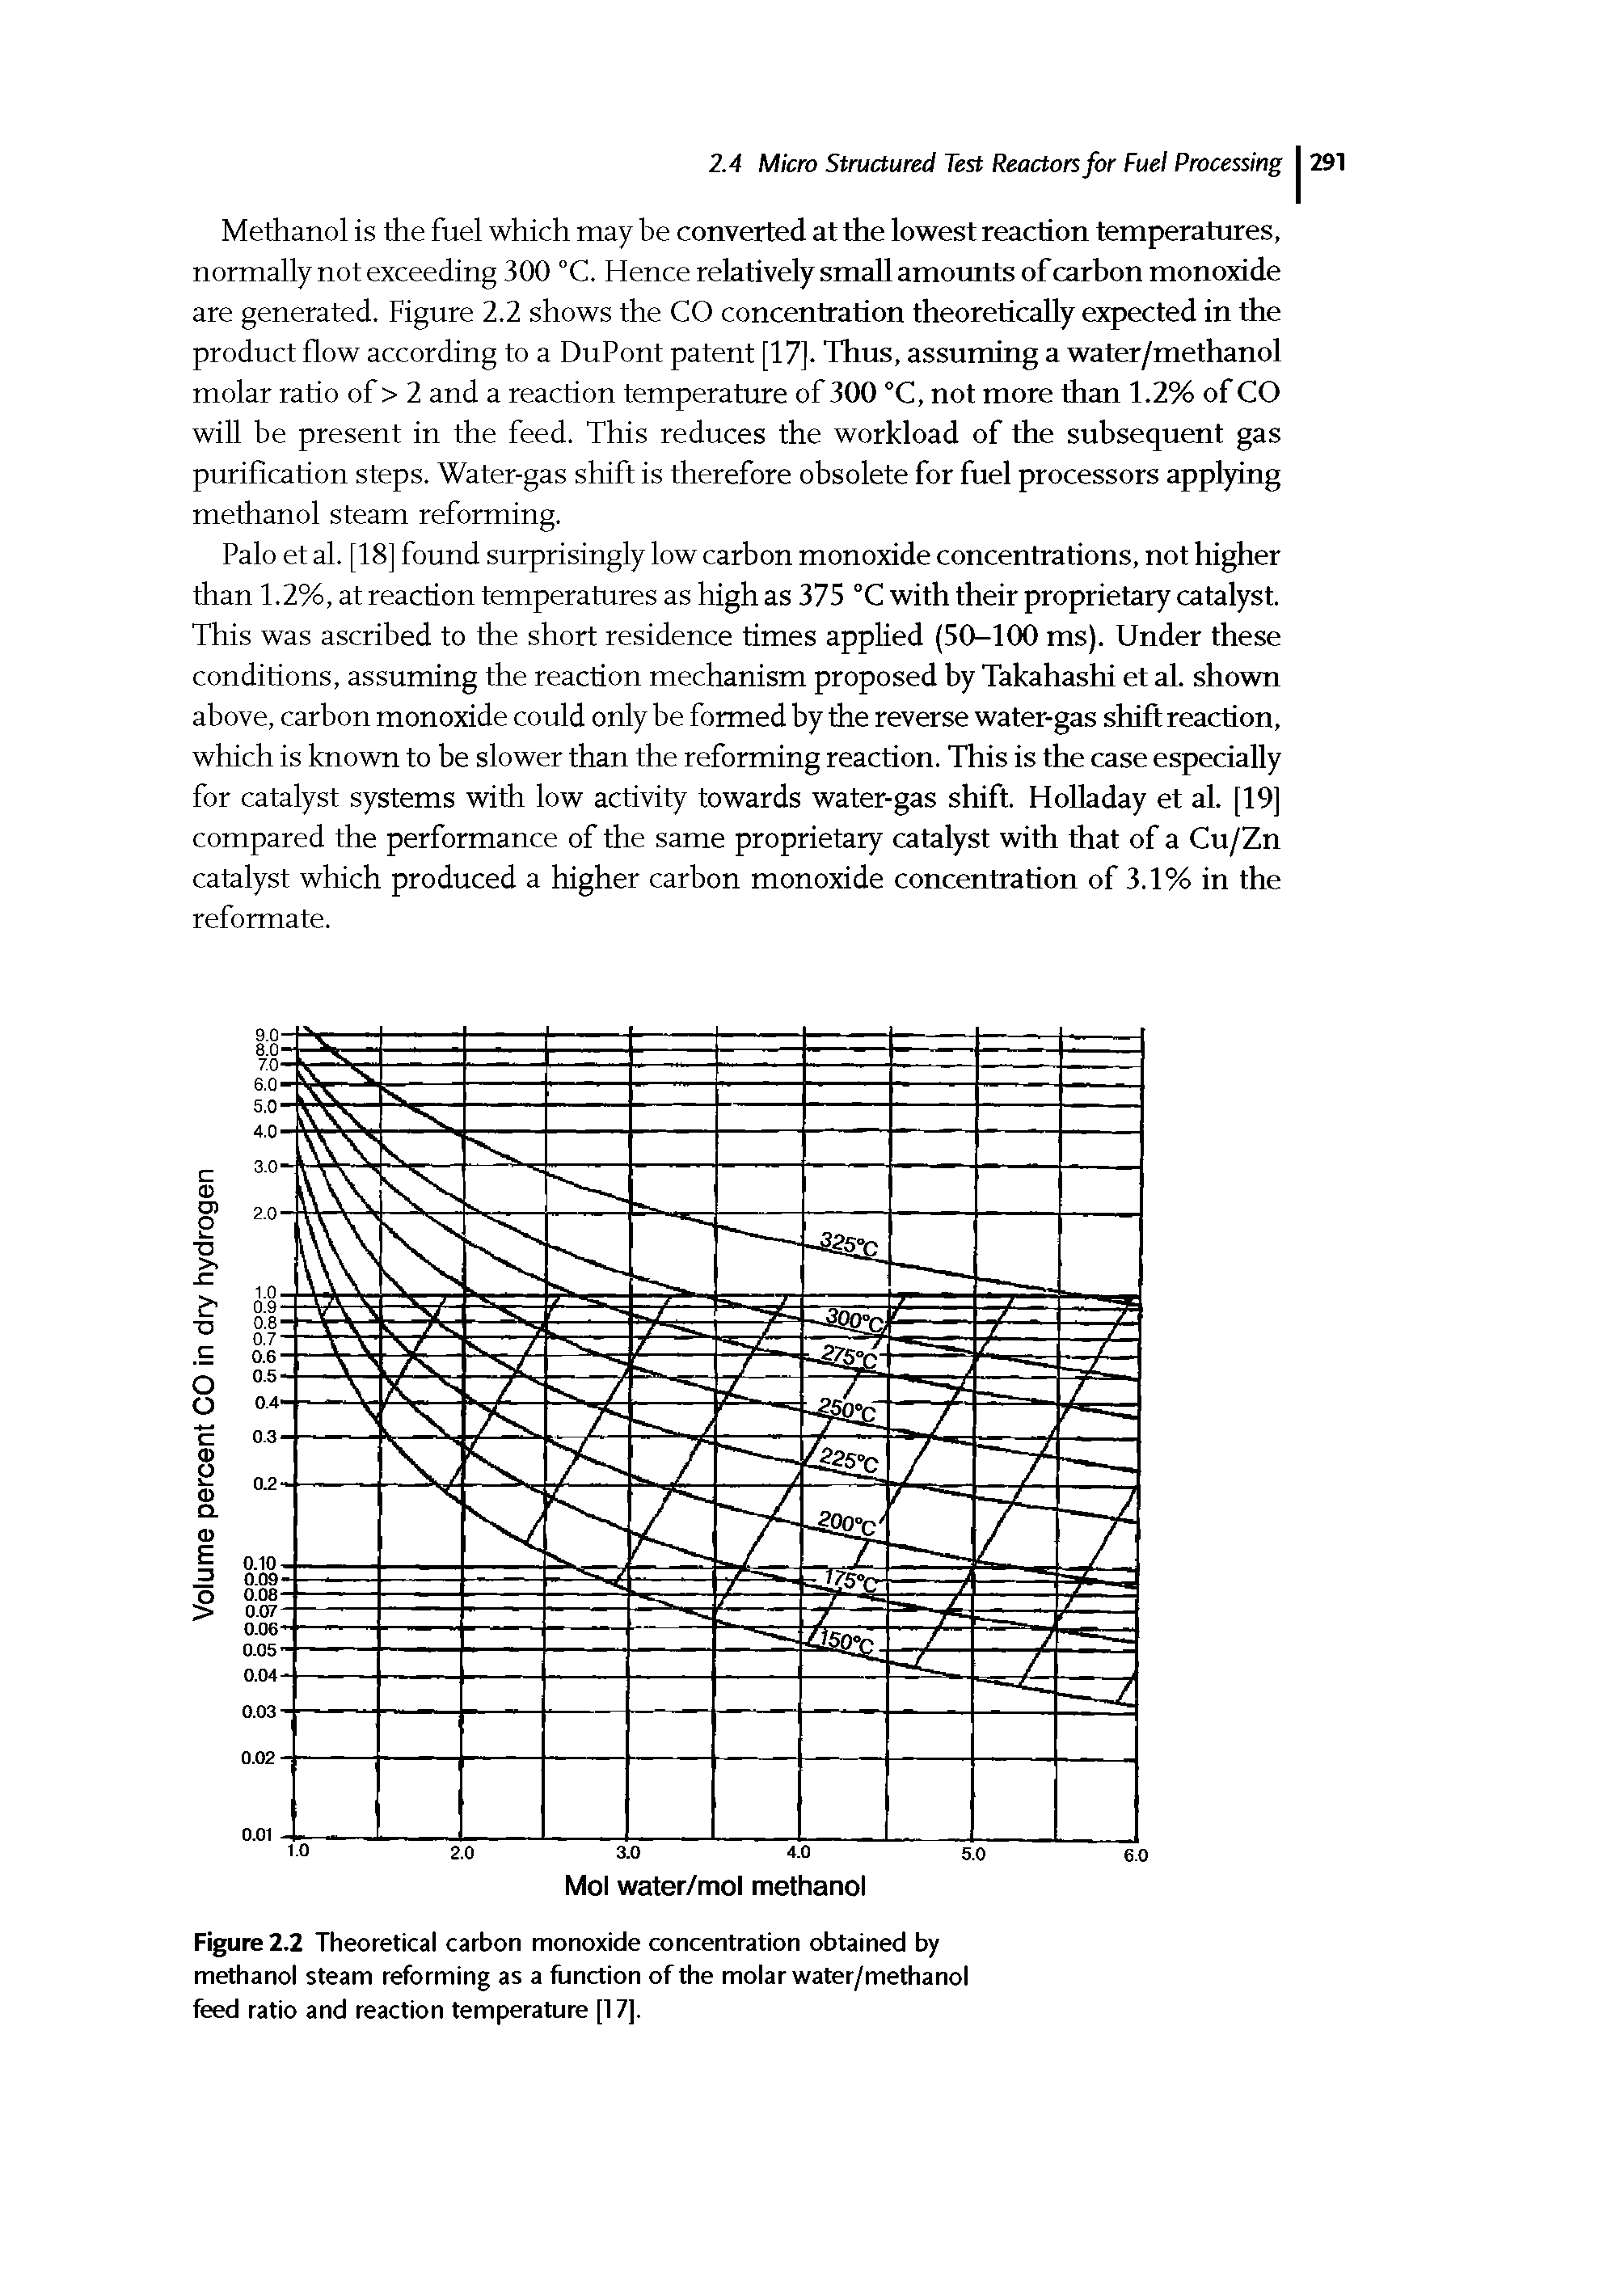 Figure 2.2 Theoretical carbon monoxide concentration obtained by methanol steam reforming as a function of the molar water/methanol feed ratio and reaction temperature [17].